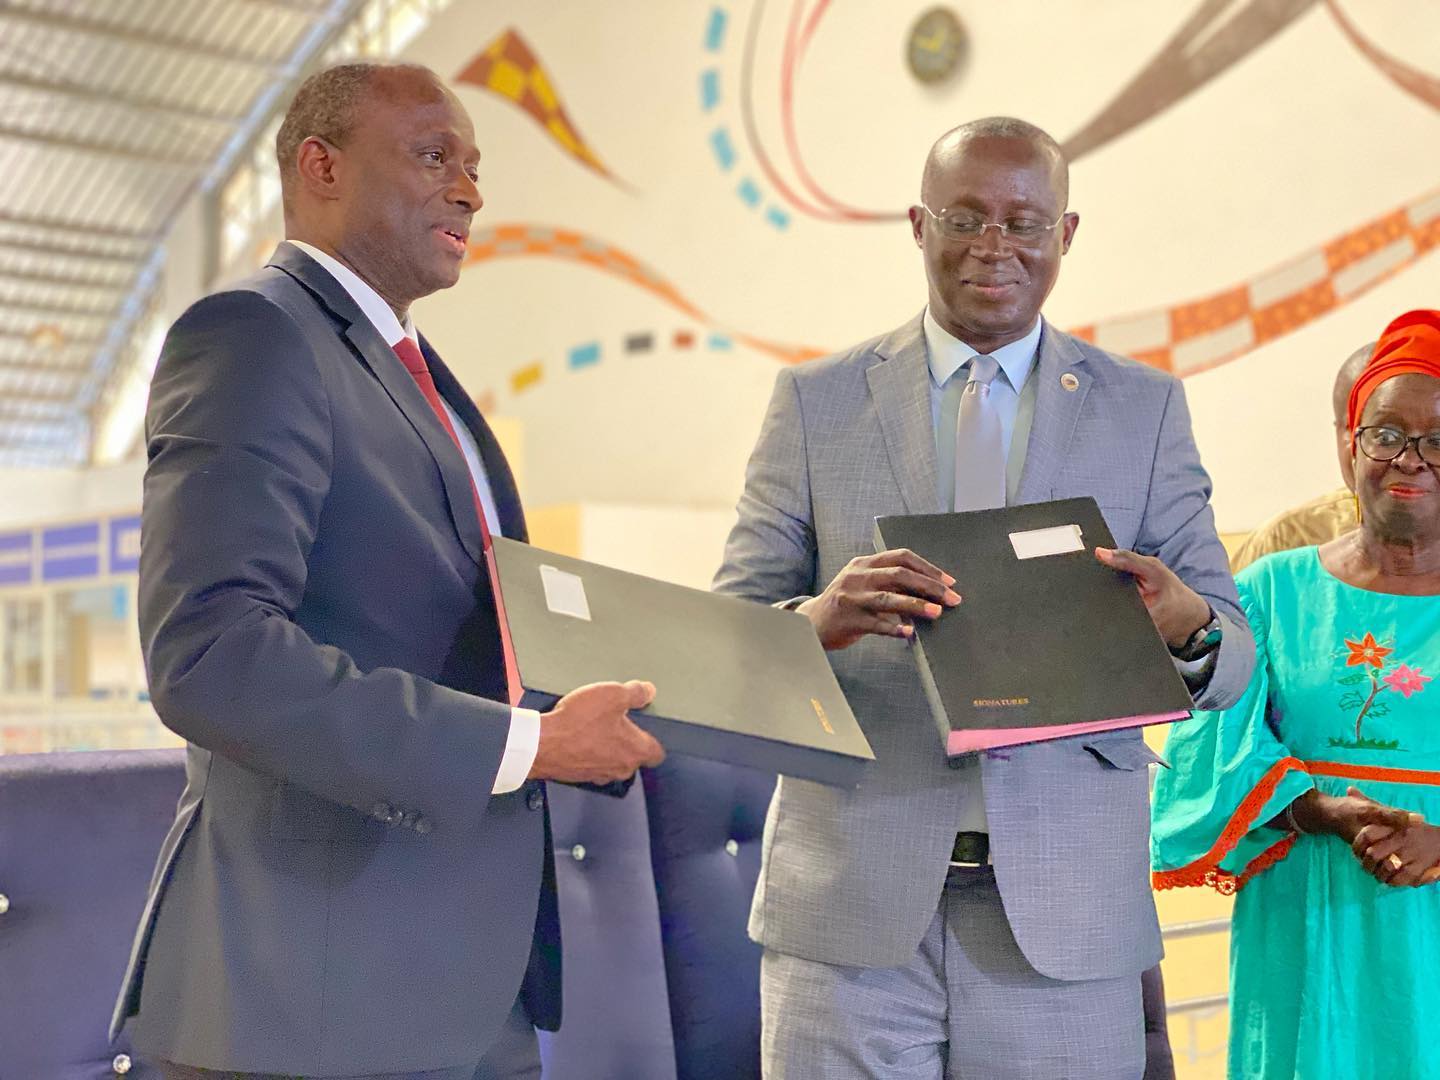 Signature of a MoU between the Dakar Port Authority and the Island of Gorée